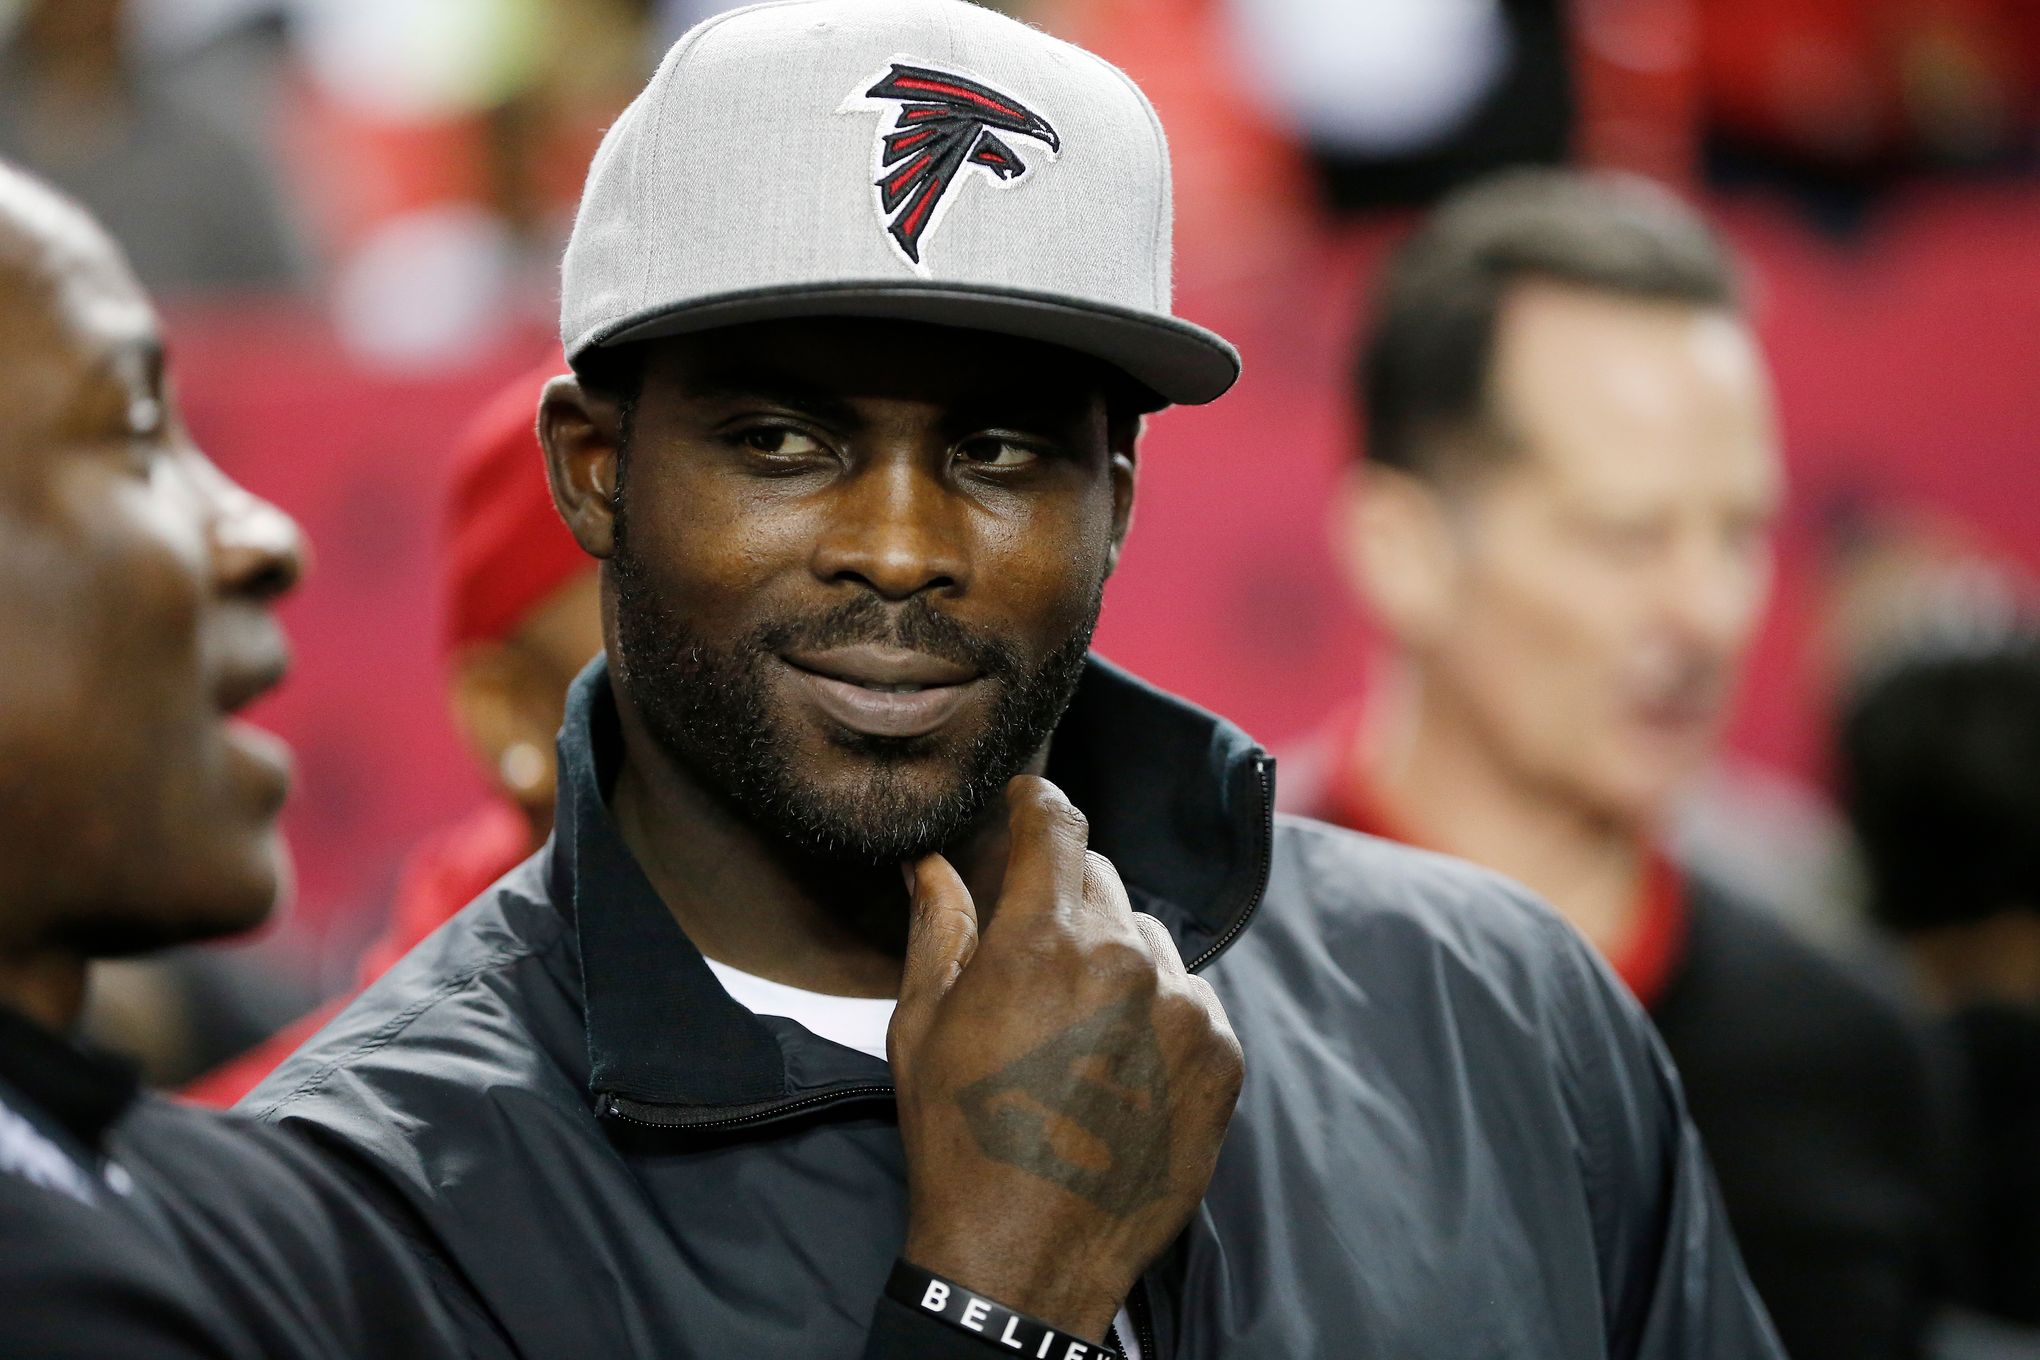 Dear Atlanta: a letter from Michael Vick to Falcons fans